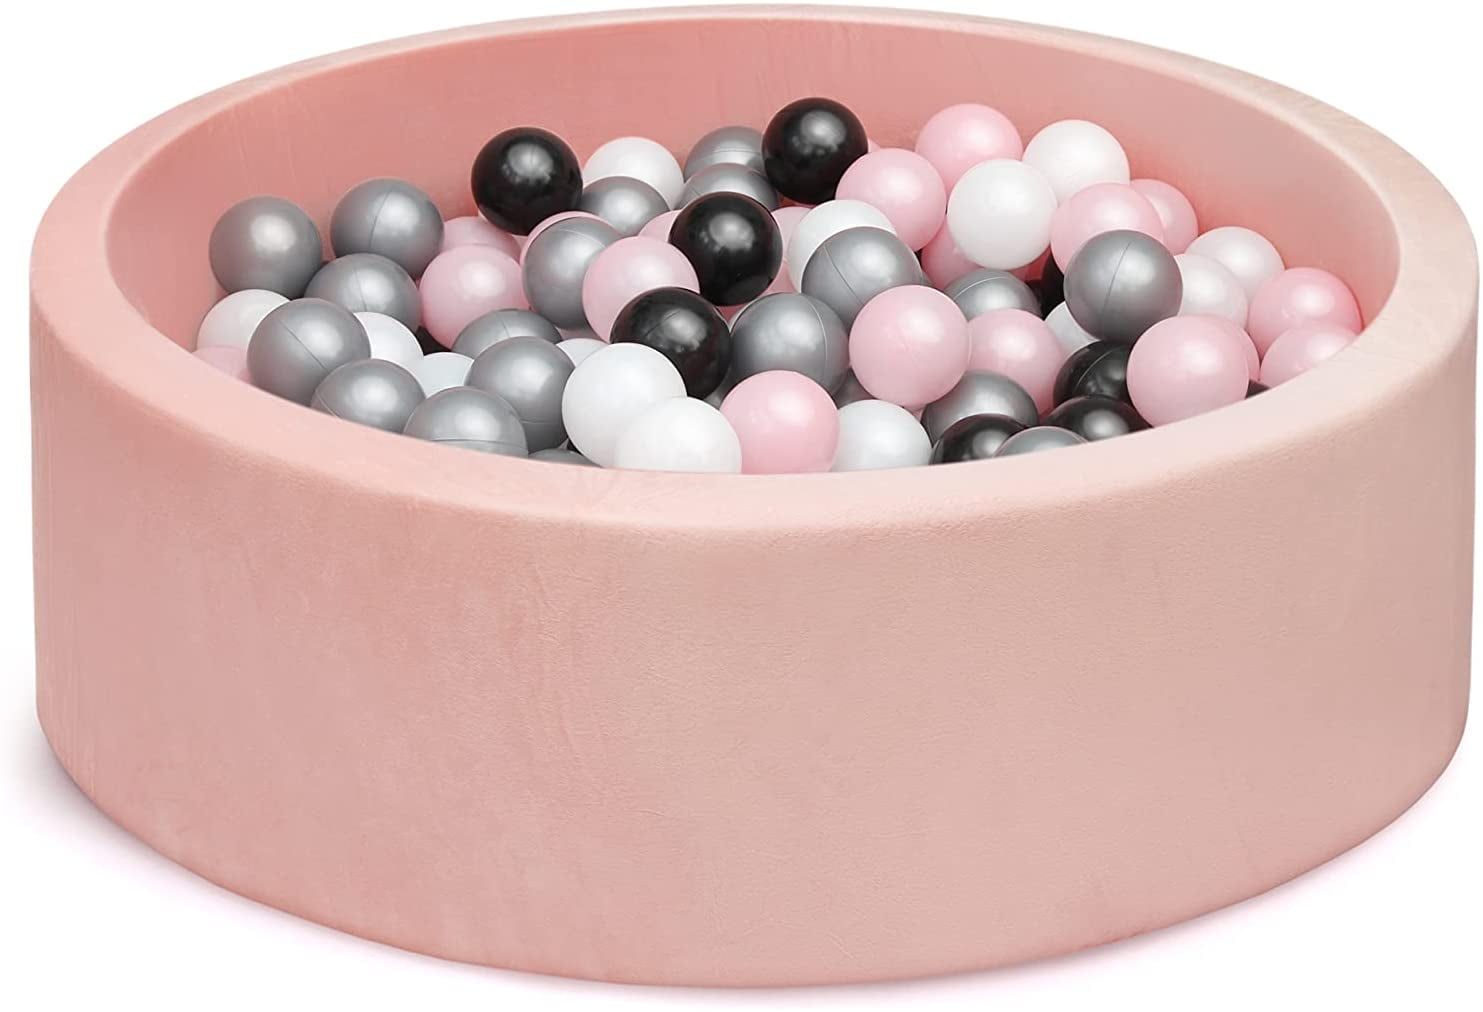 Part 2: Get some ball pit balls and 3” styrofoam circles. I linked all